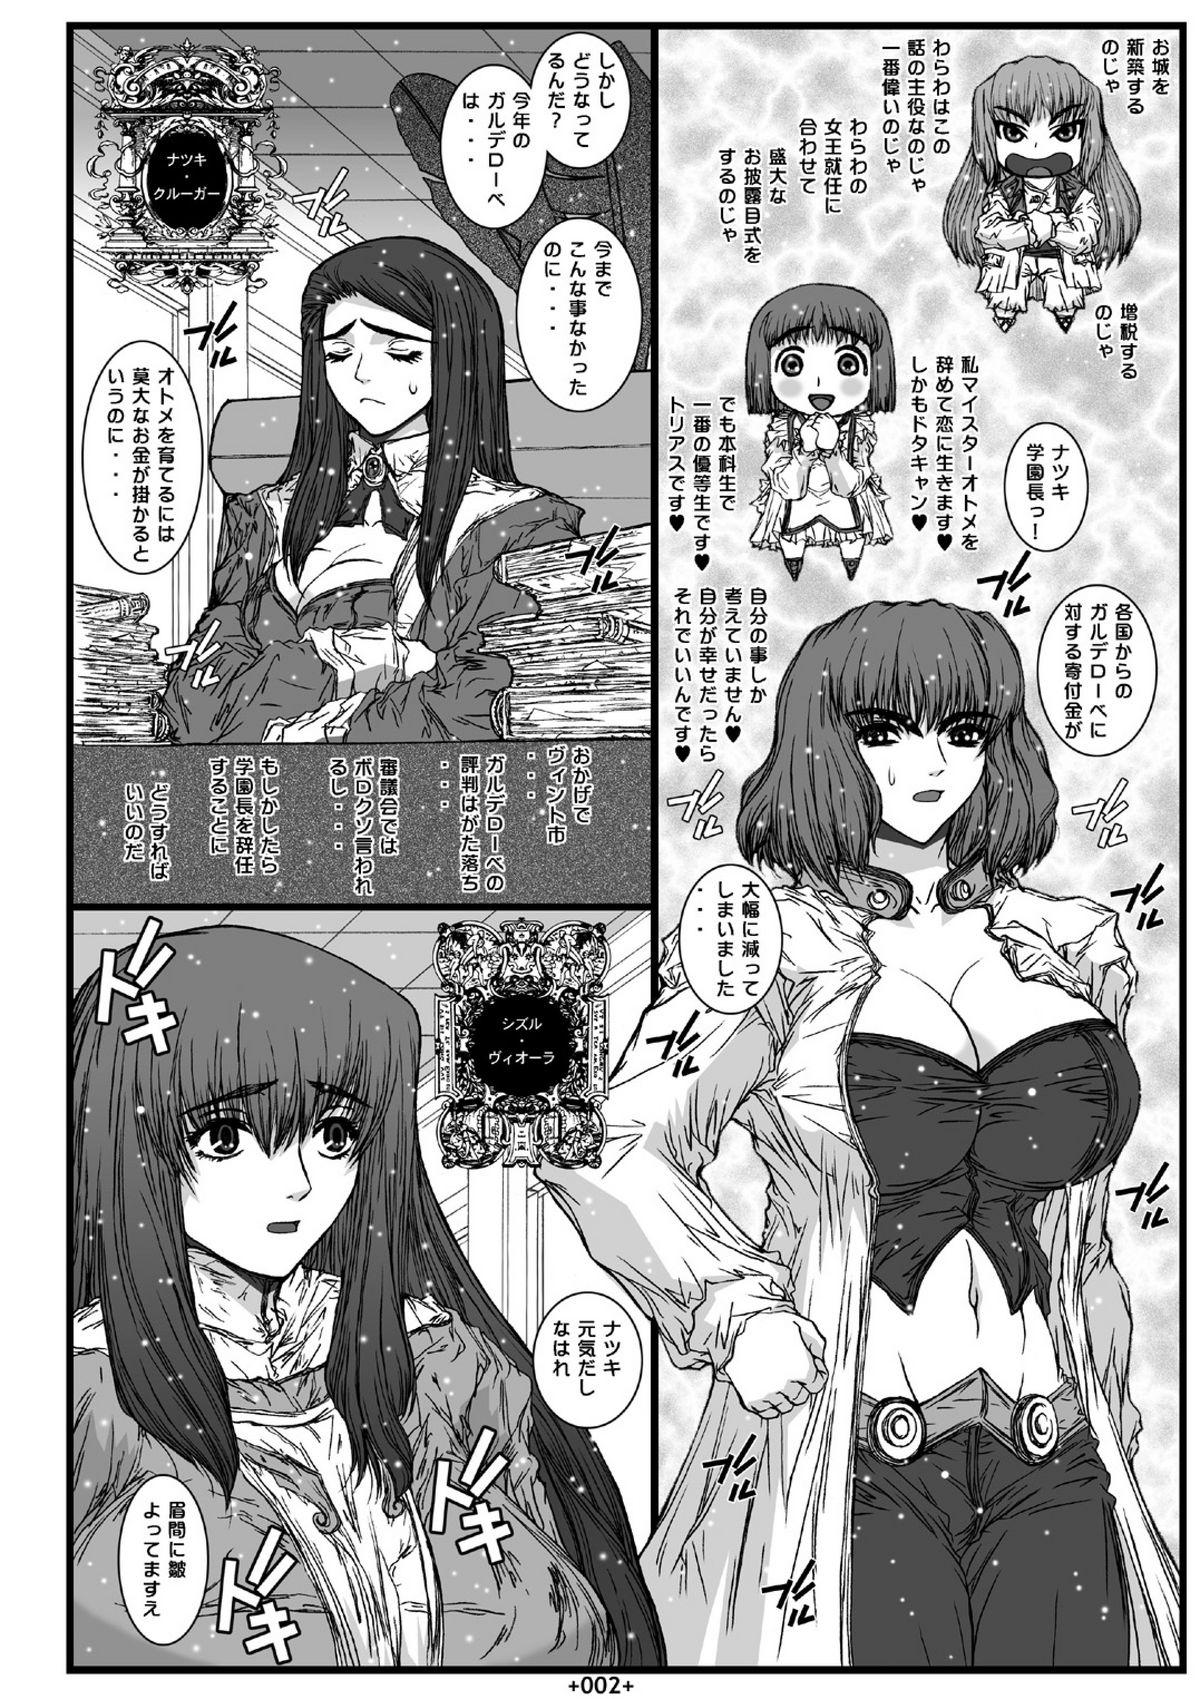 Hot Milf Mai-In 2 - Mai otome Students - Page 4